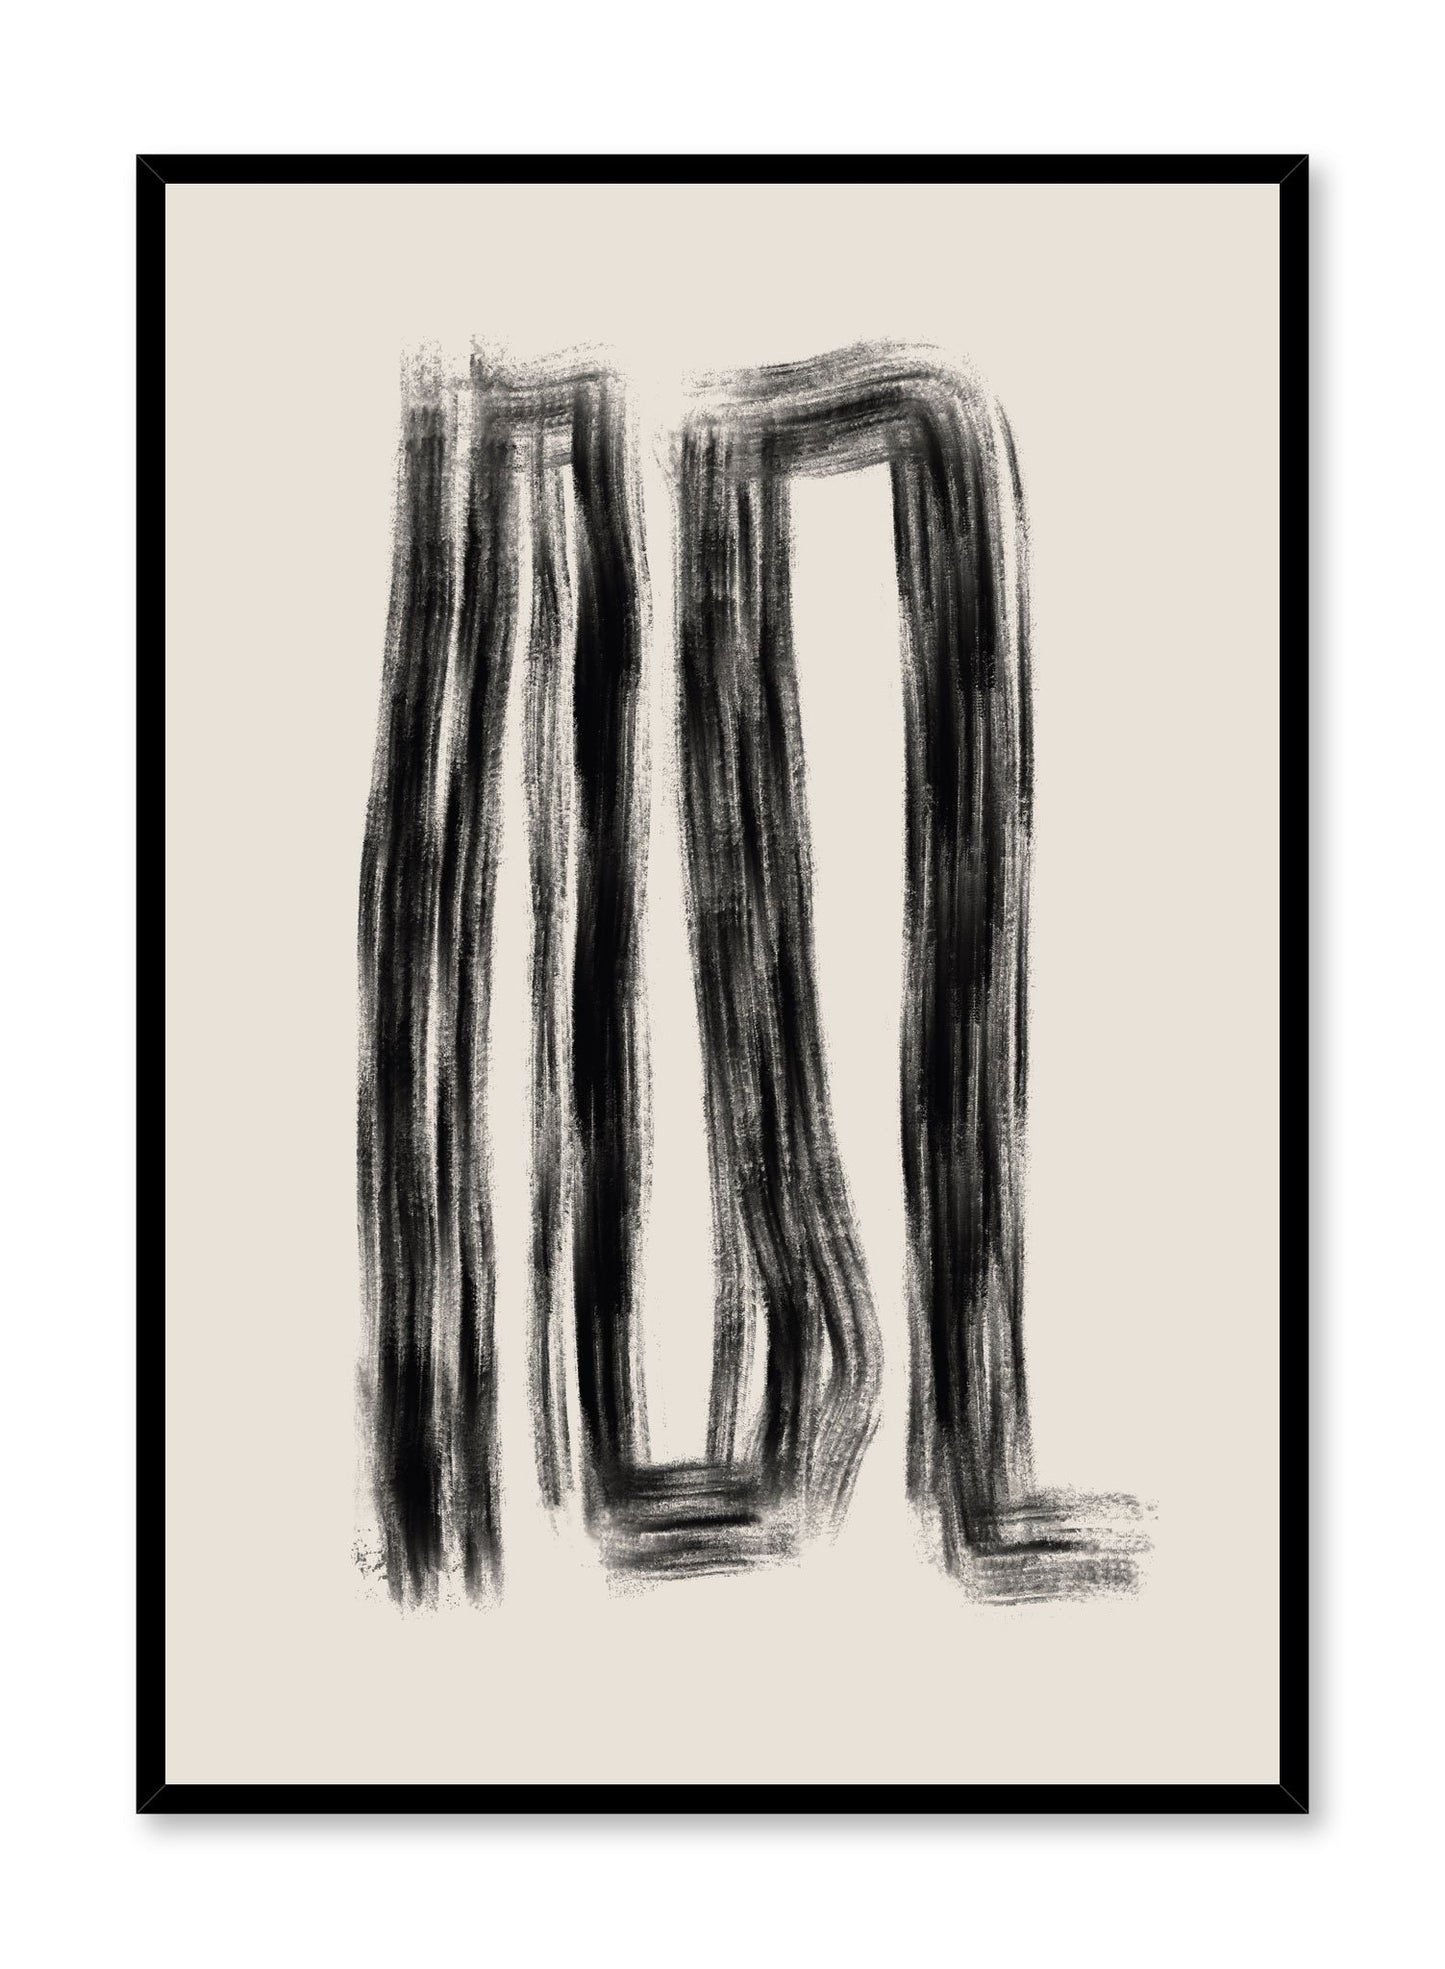 Modern minimalist poster by Opposite Wall with abstract design of Dead Ends by Toffie Affichiste